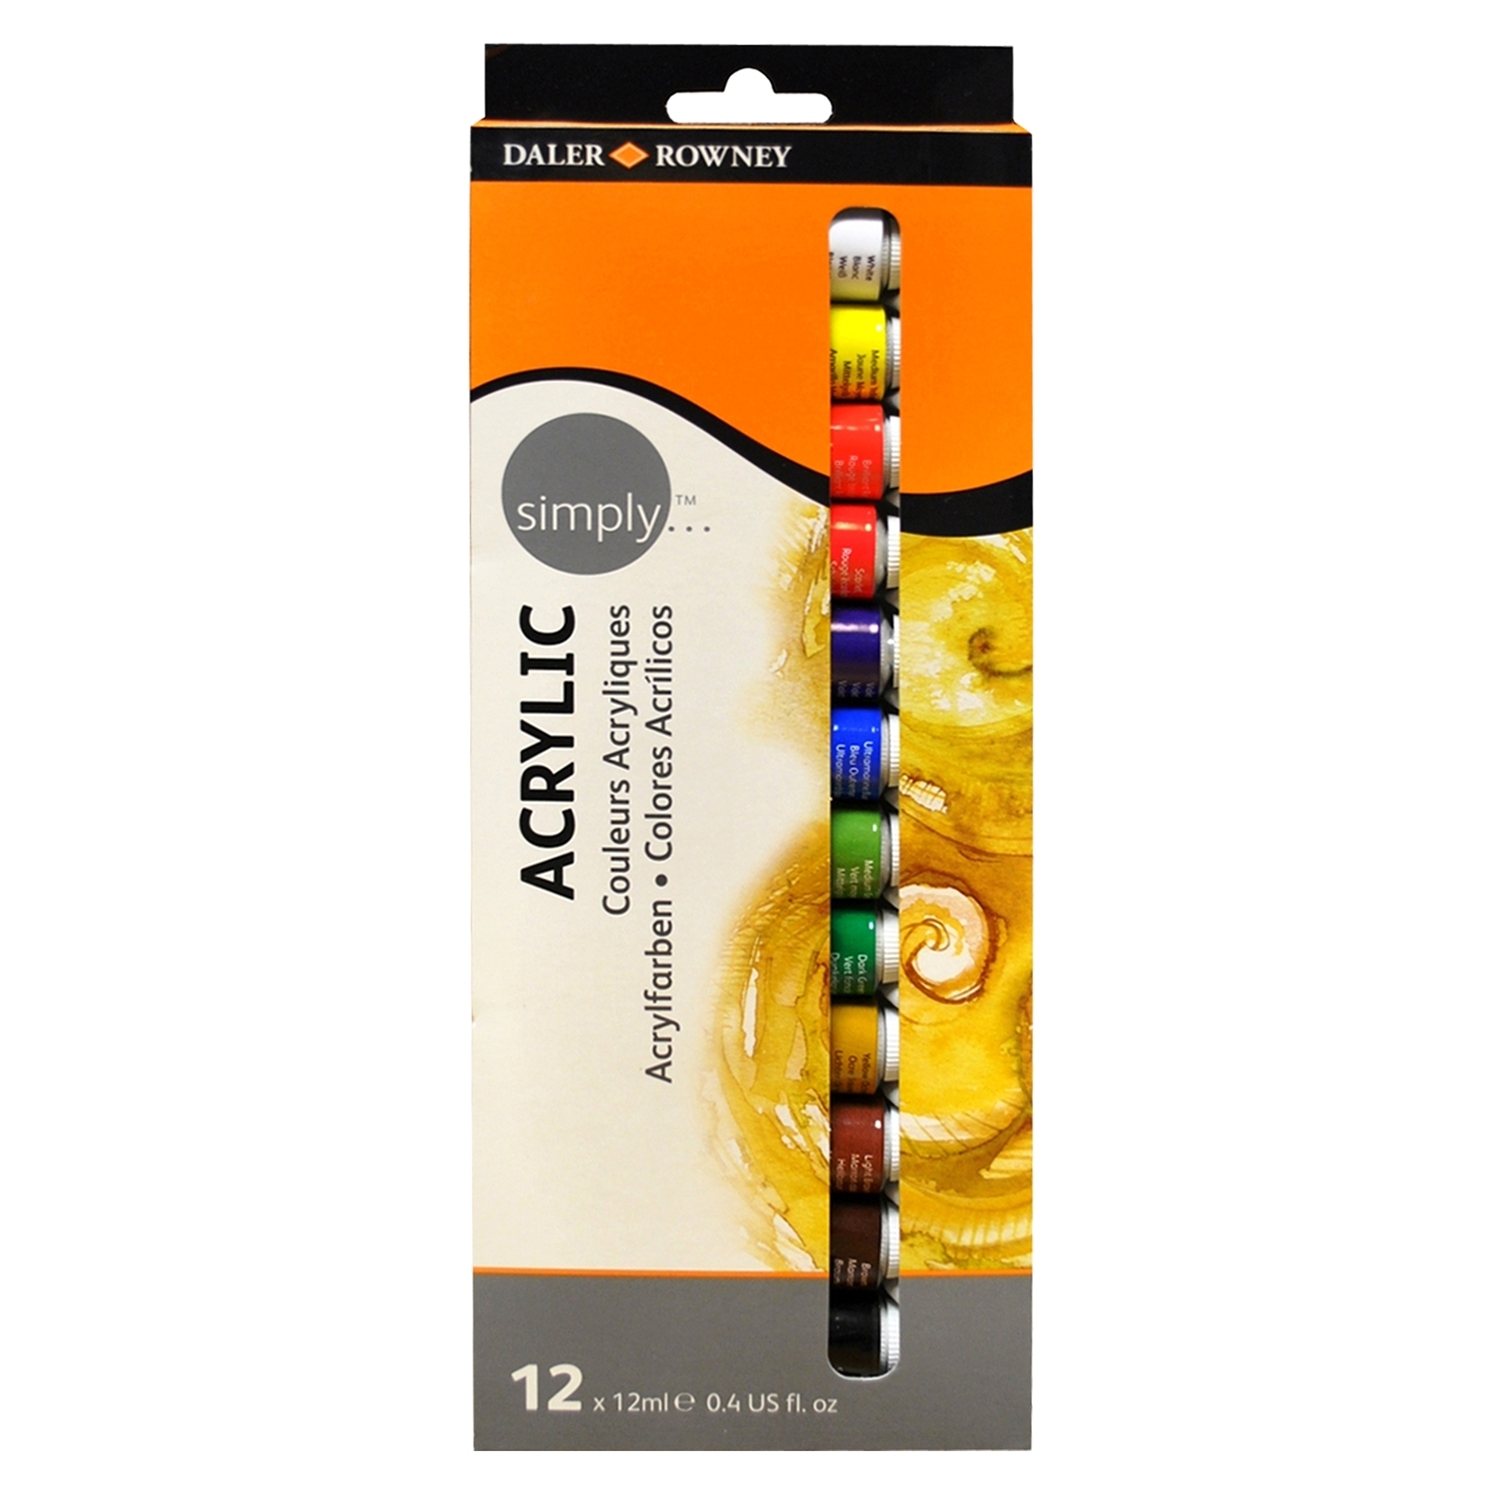 Daler-Rowney Simply Acrylic Paint 12ml 12 Pack Image